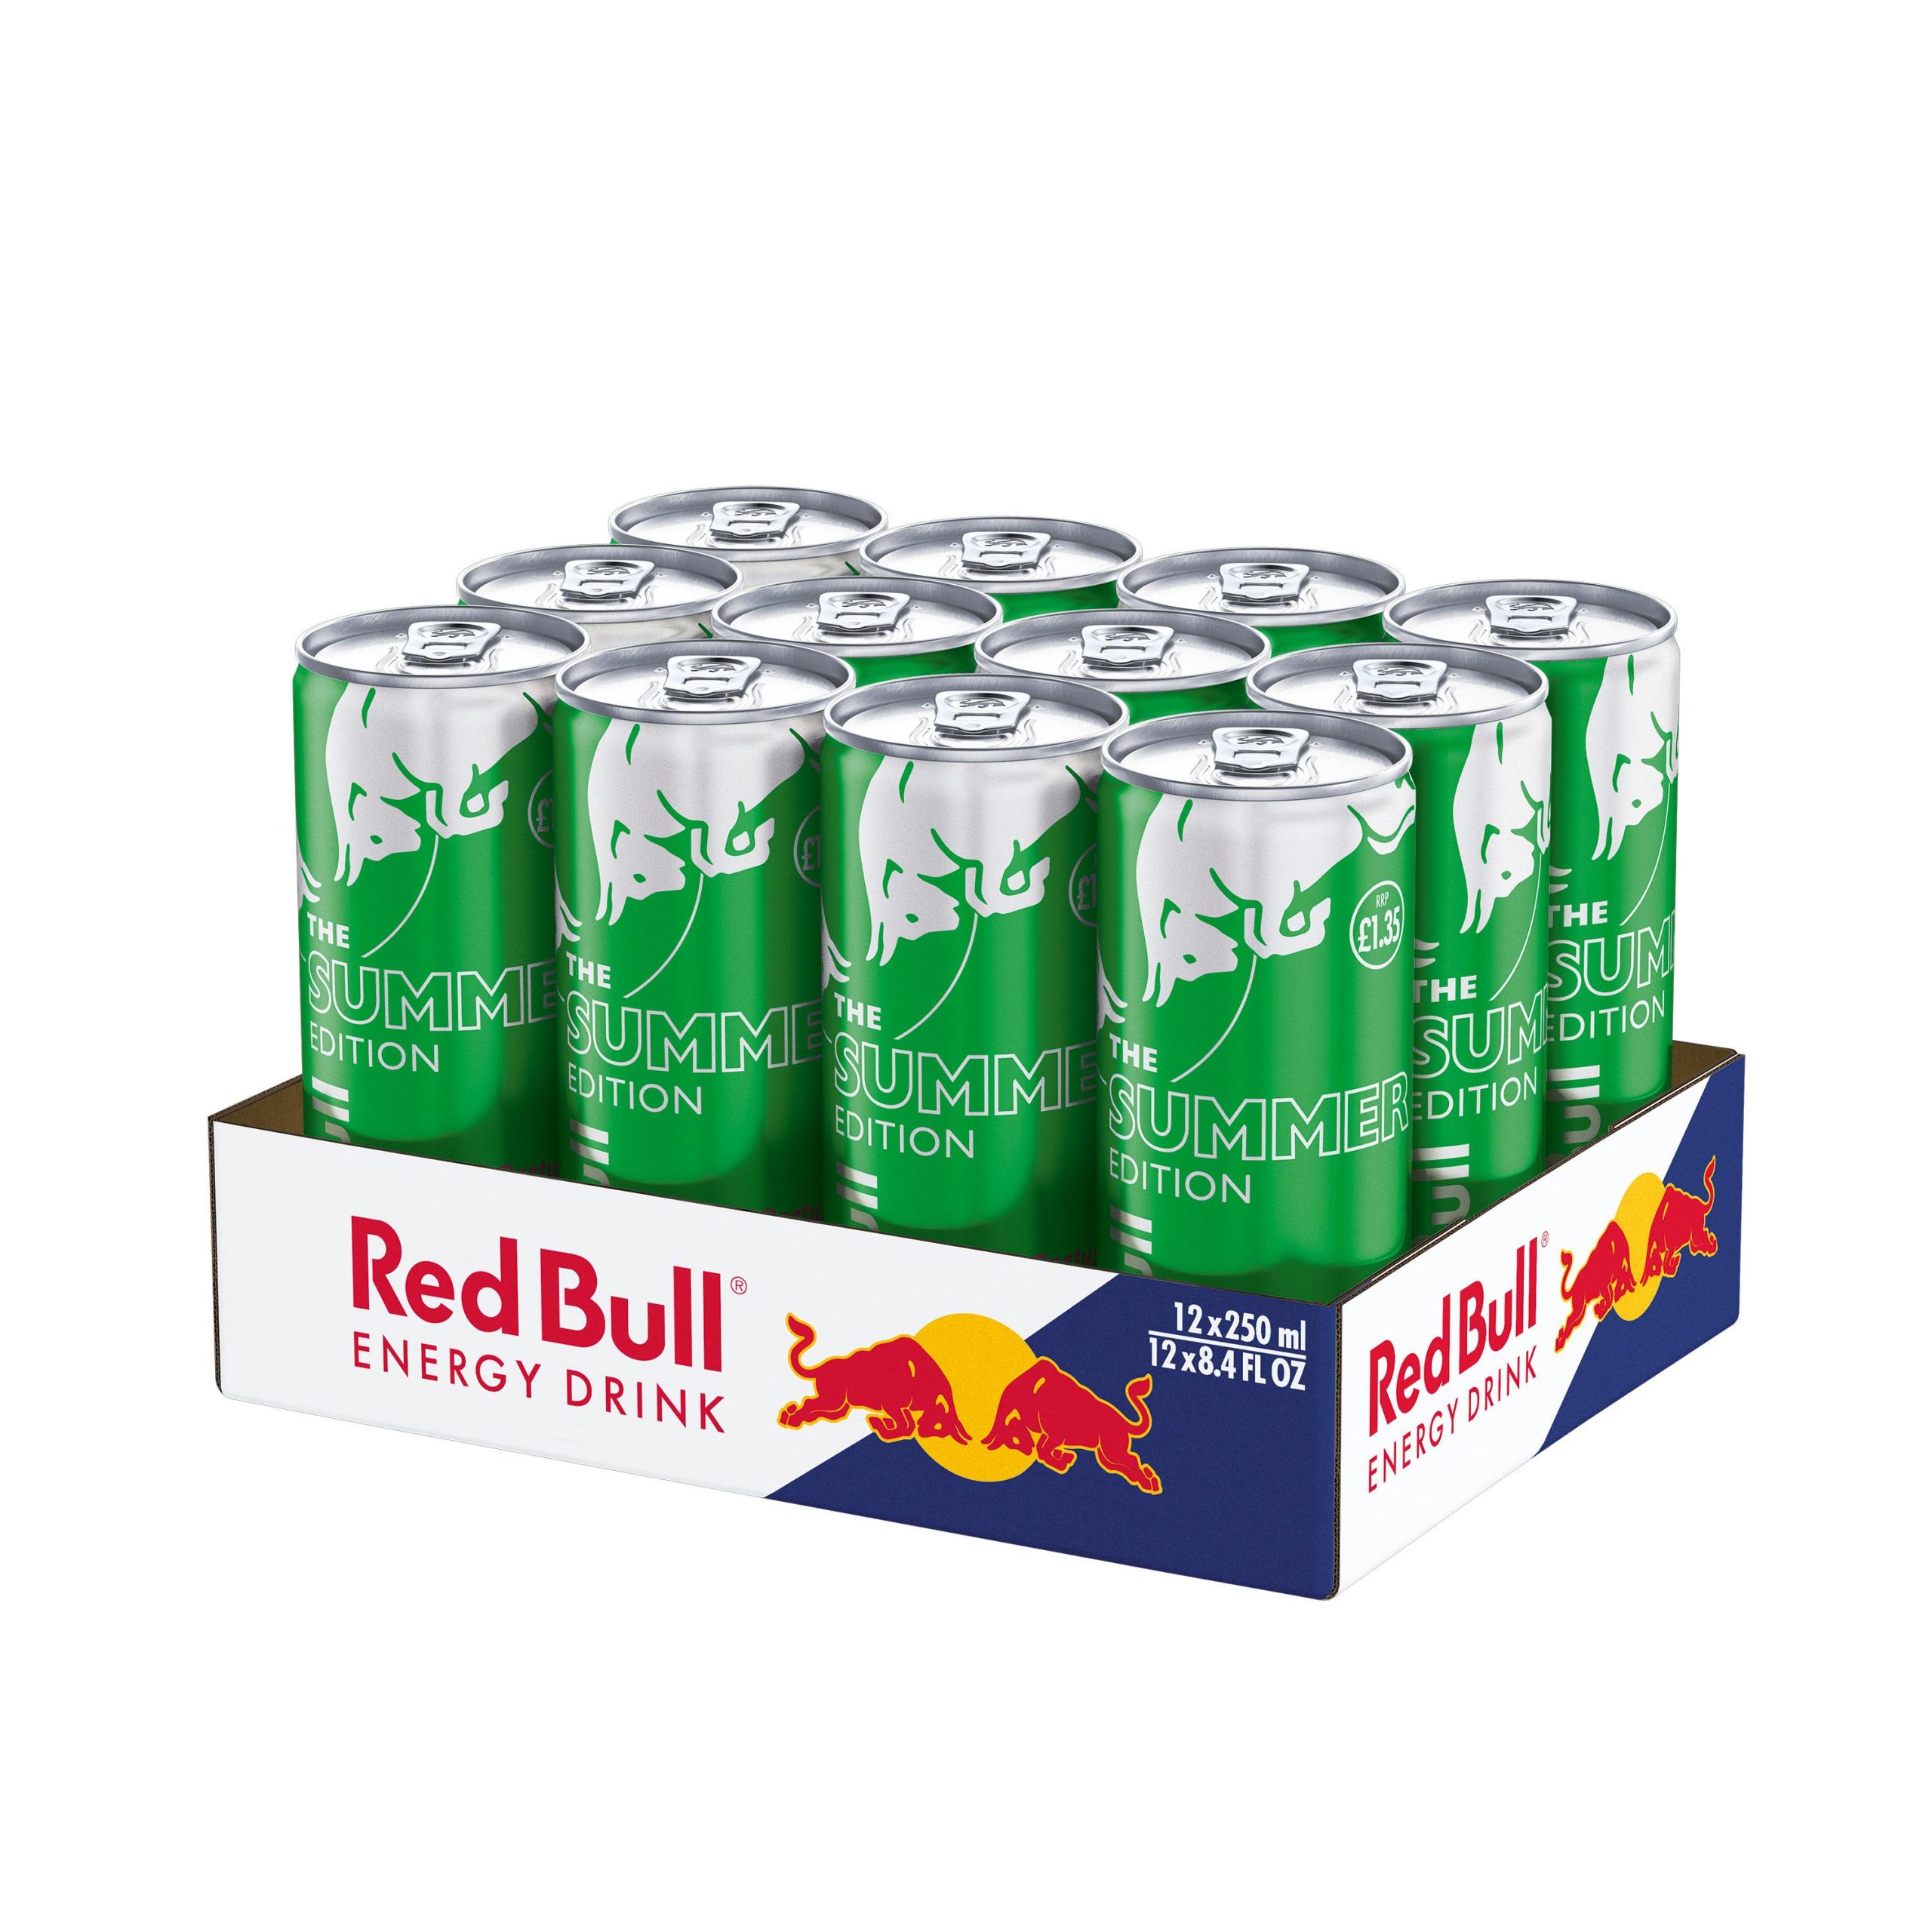 Red Bull announces the 2021 Summer Edition – Cactus Fruit